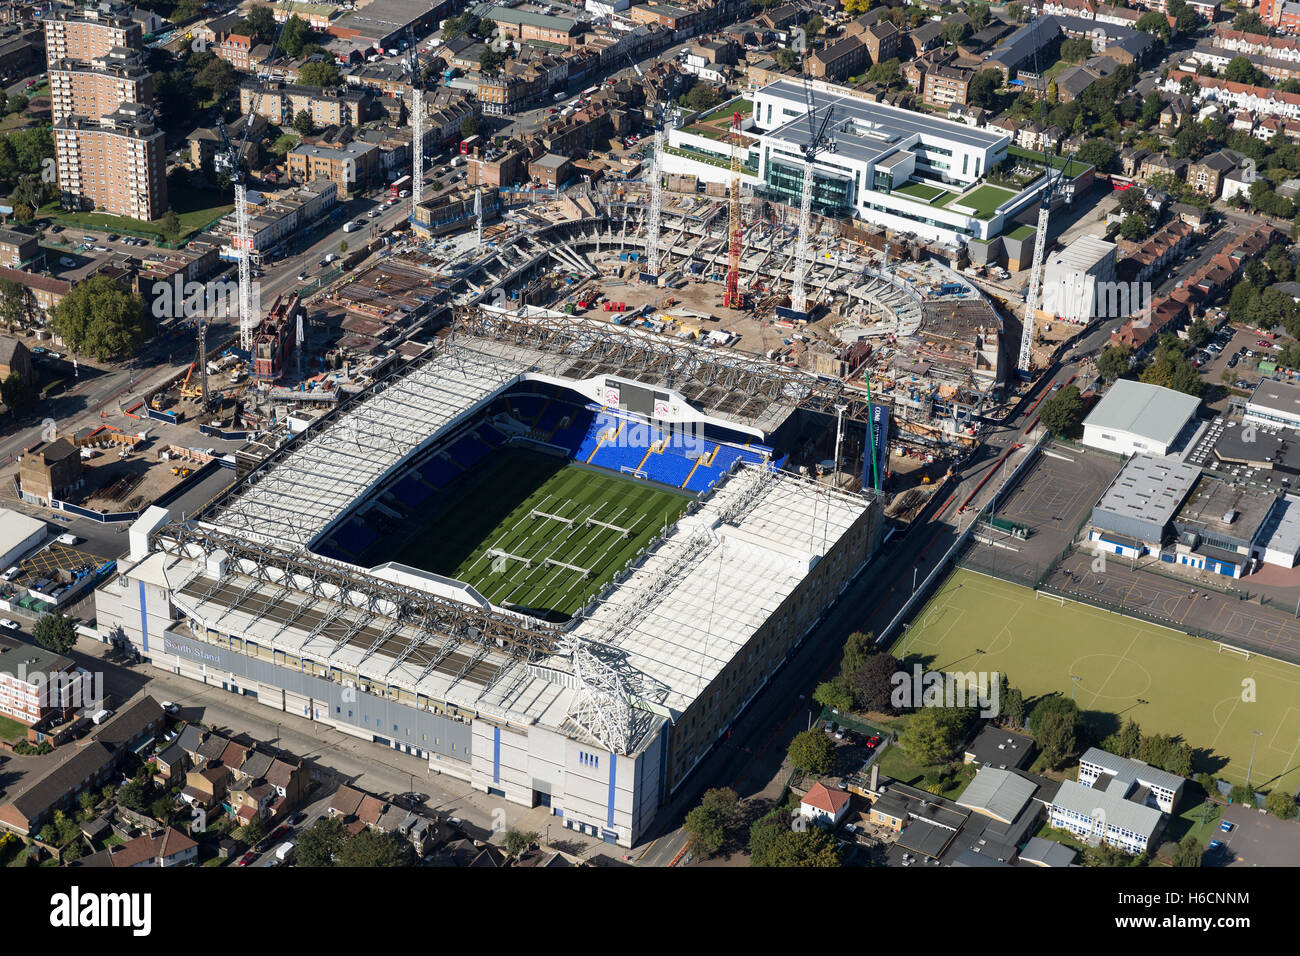 Tottenham Hotspur Fc New Stadium Construction. White Hart Lane Has Been  Partially Demolished Ahead Of The Building Stock Photo - Alamy